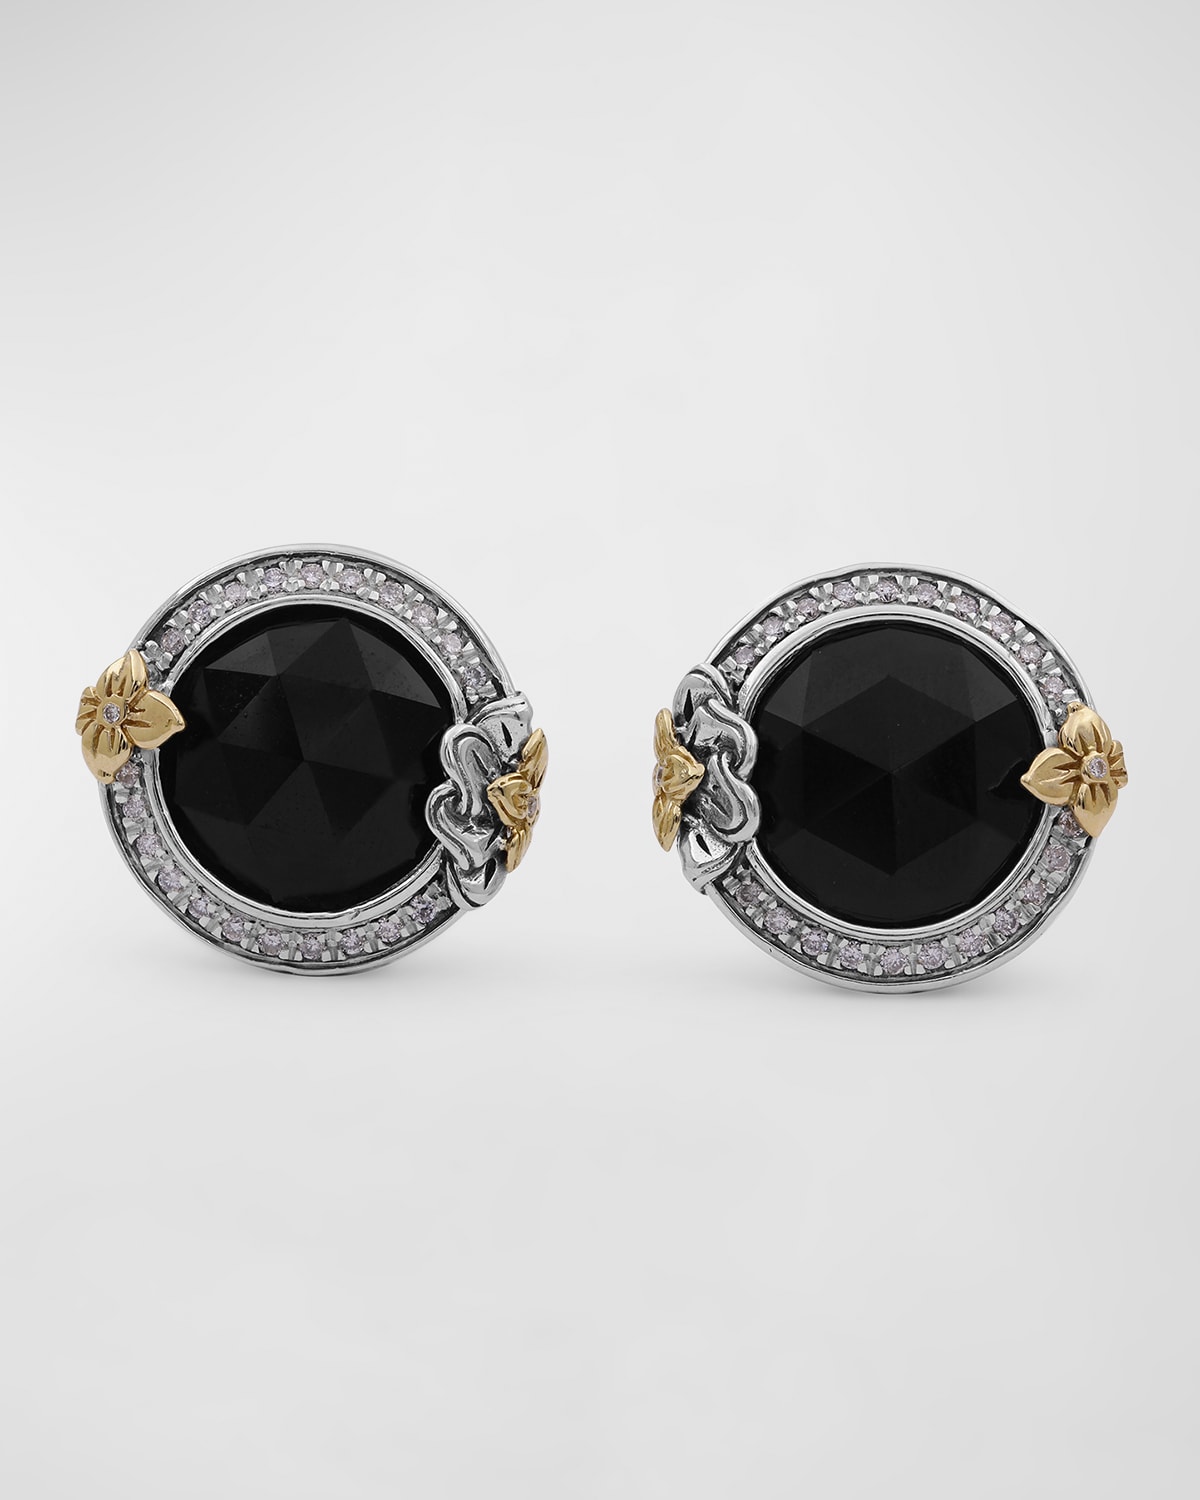 Garden of Stephen Faceted Black Onyx Earrings in Sterling Silver with 18K Gold Flowers and Diamonds